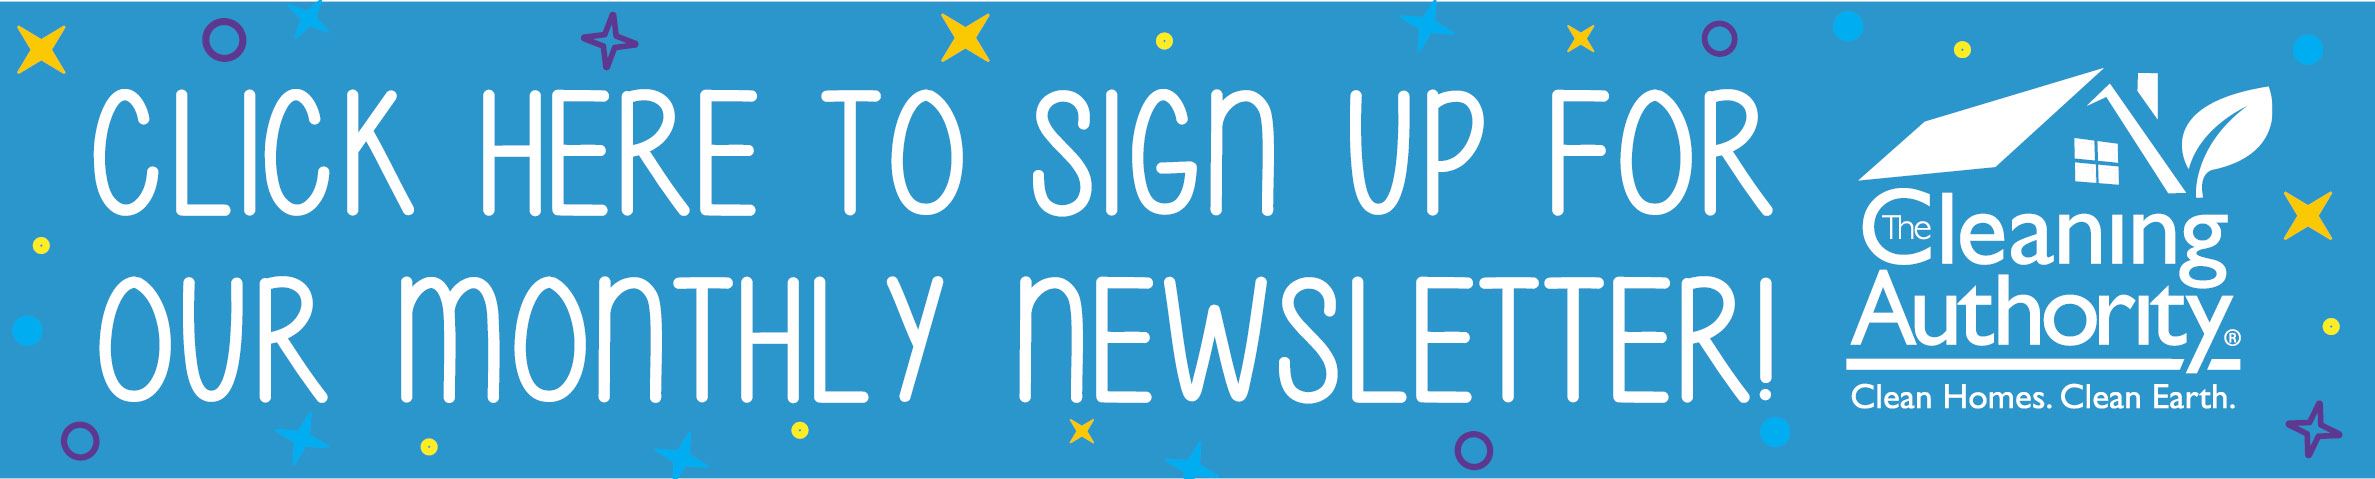 Sign up for monthly newsletter